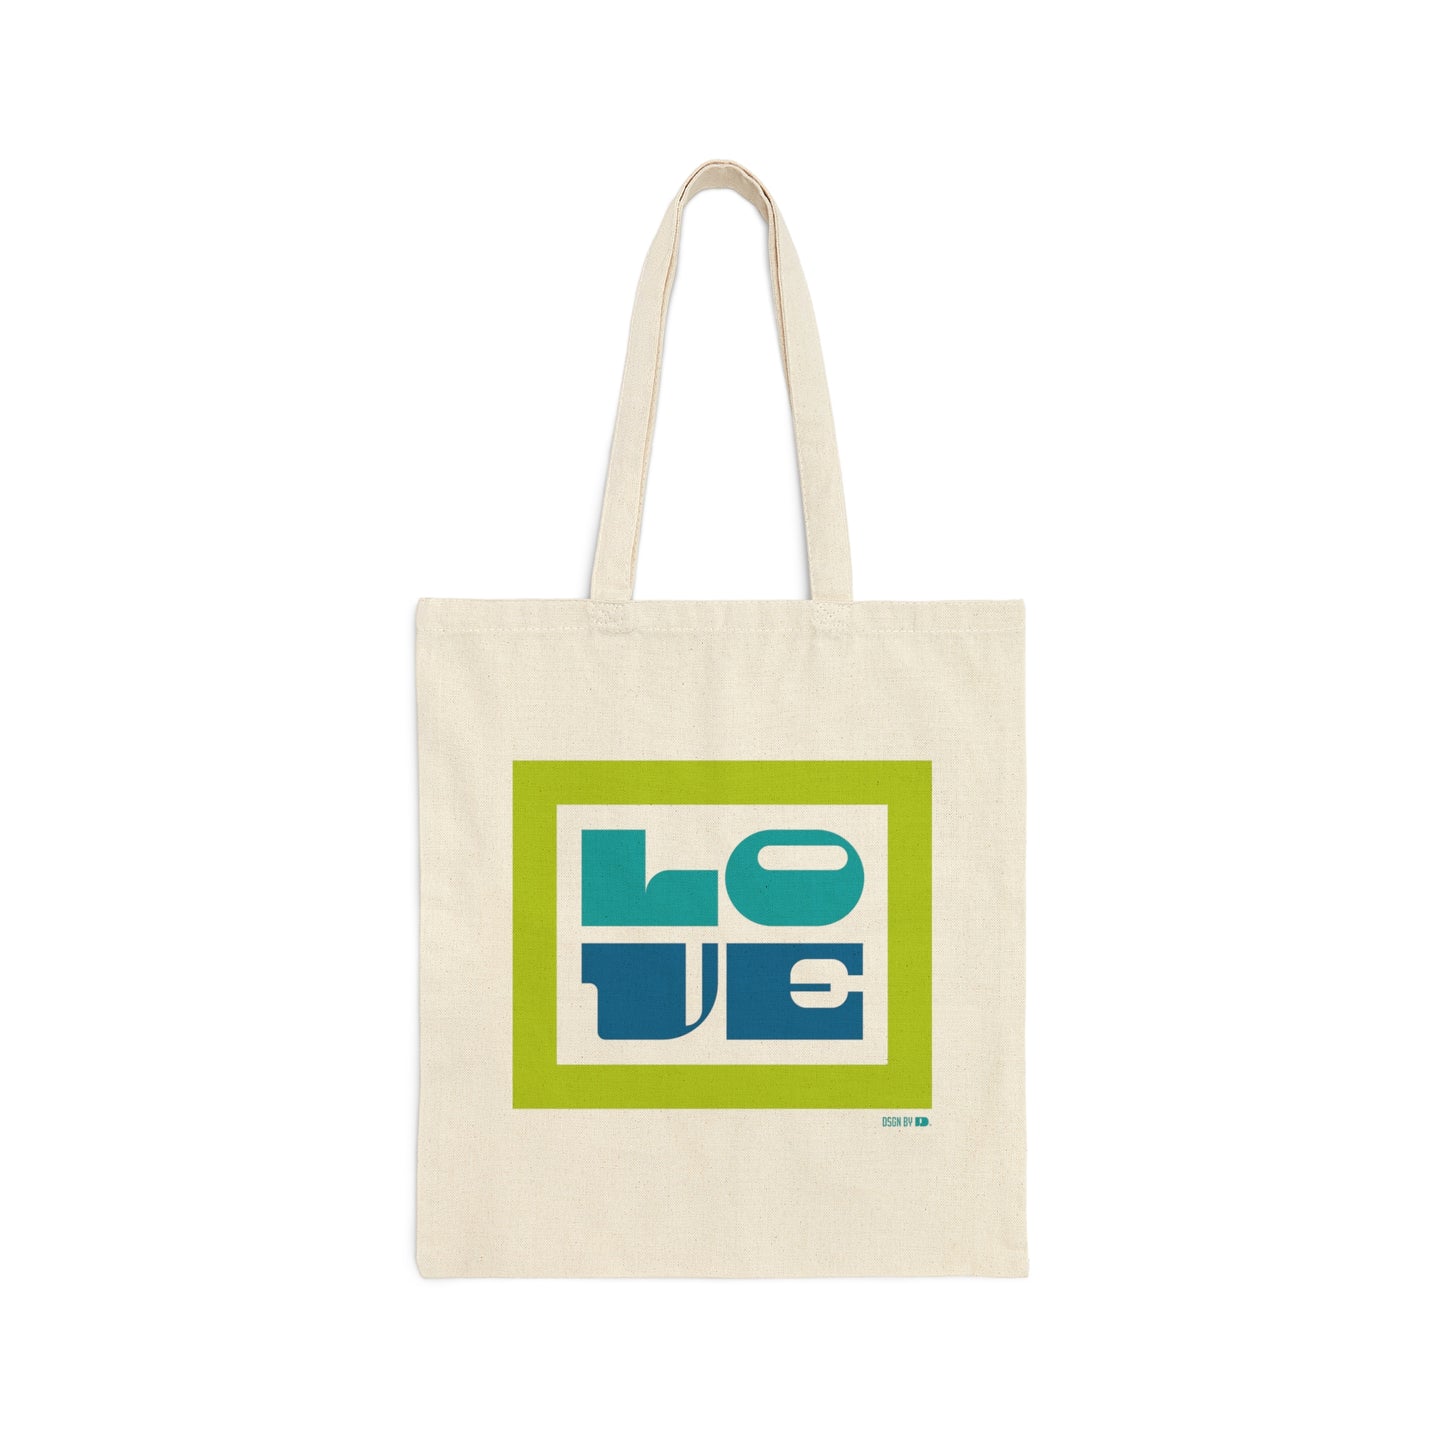 A cotton canvas tote bag with green, teal, and blue design.